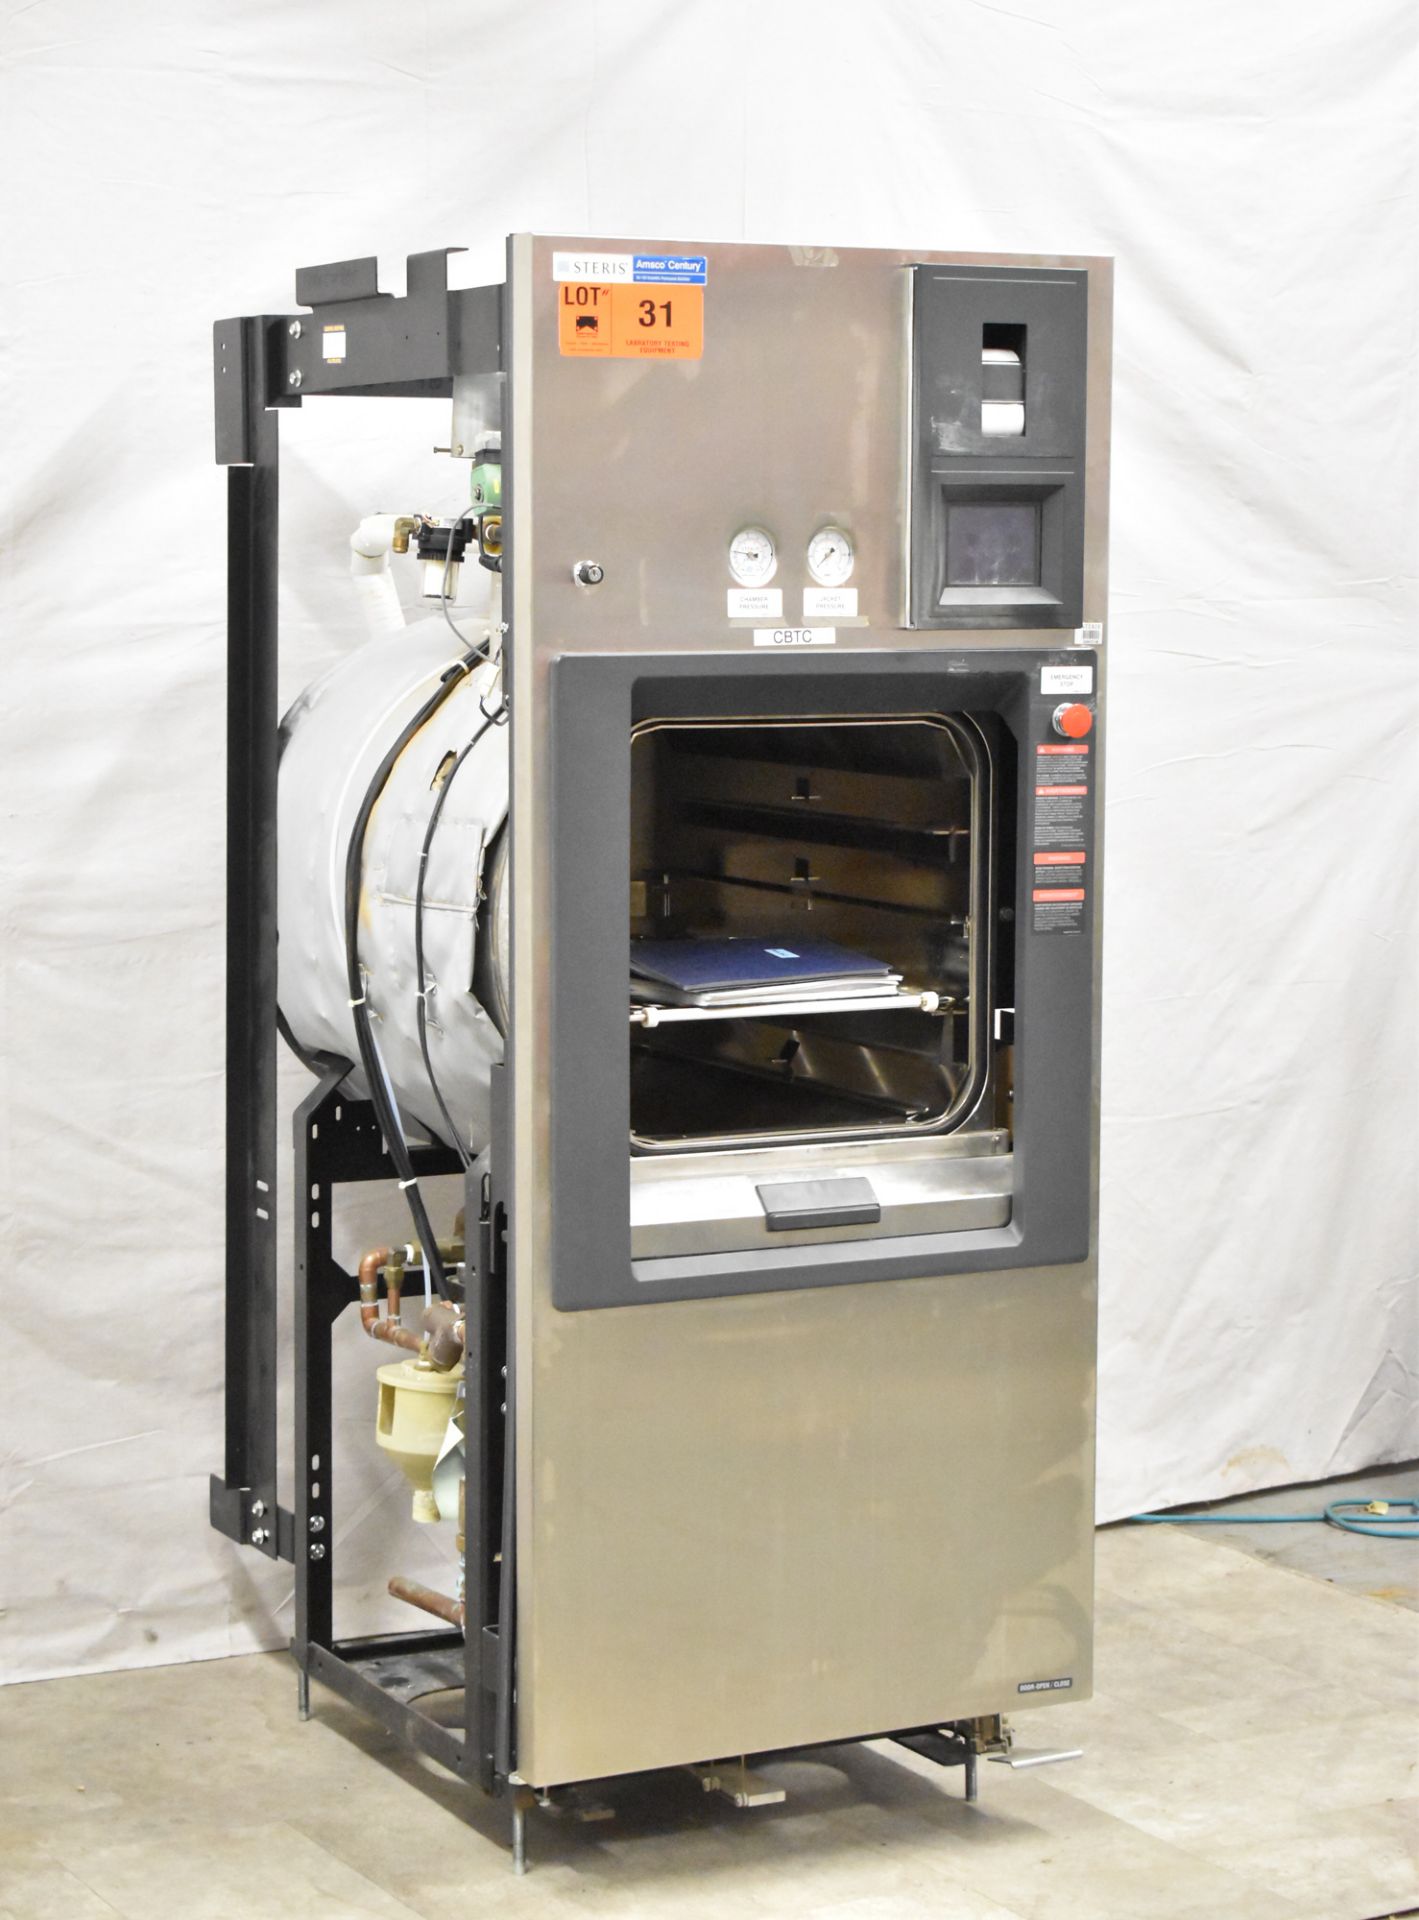 STERIS SV-120 SCIENTIFIC PRE VACUUM STERILIZER WITH DIGITAL TOUCH SCREEN CONTROL, THERMAL PRINTER, - Image 2 of 4